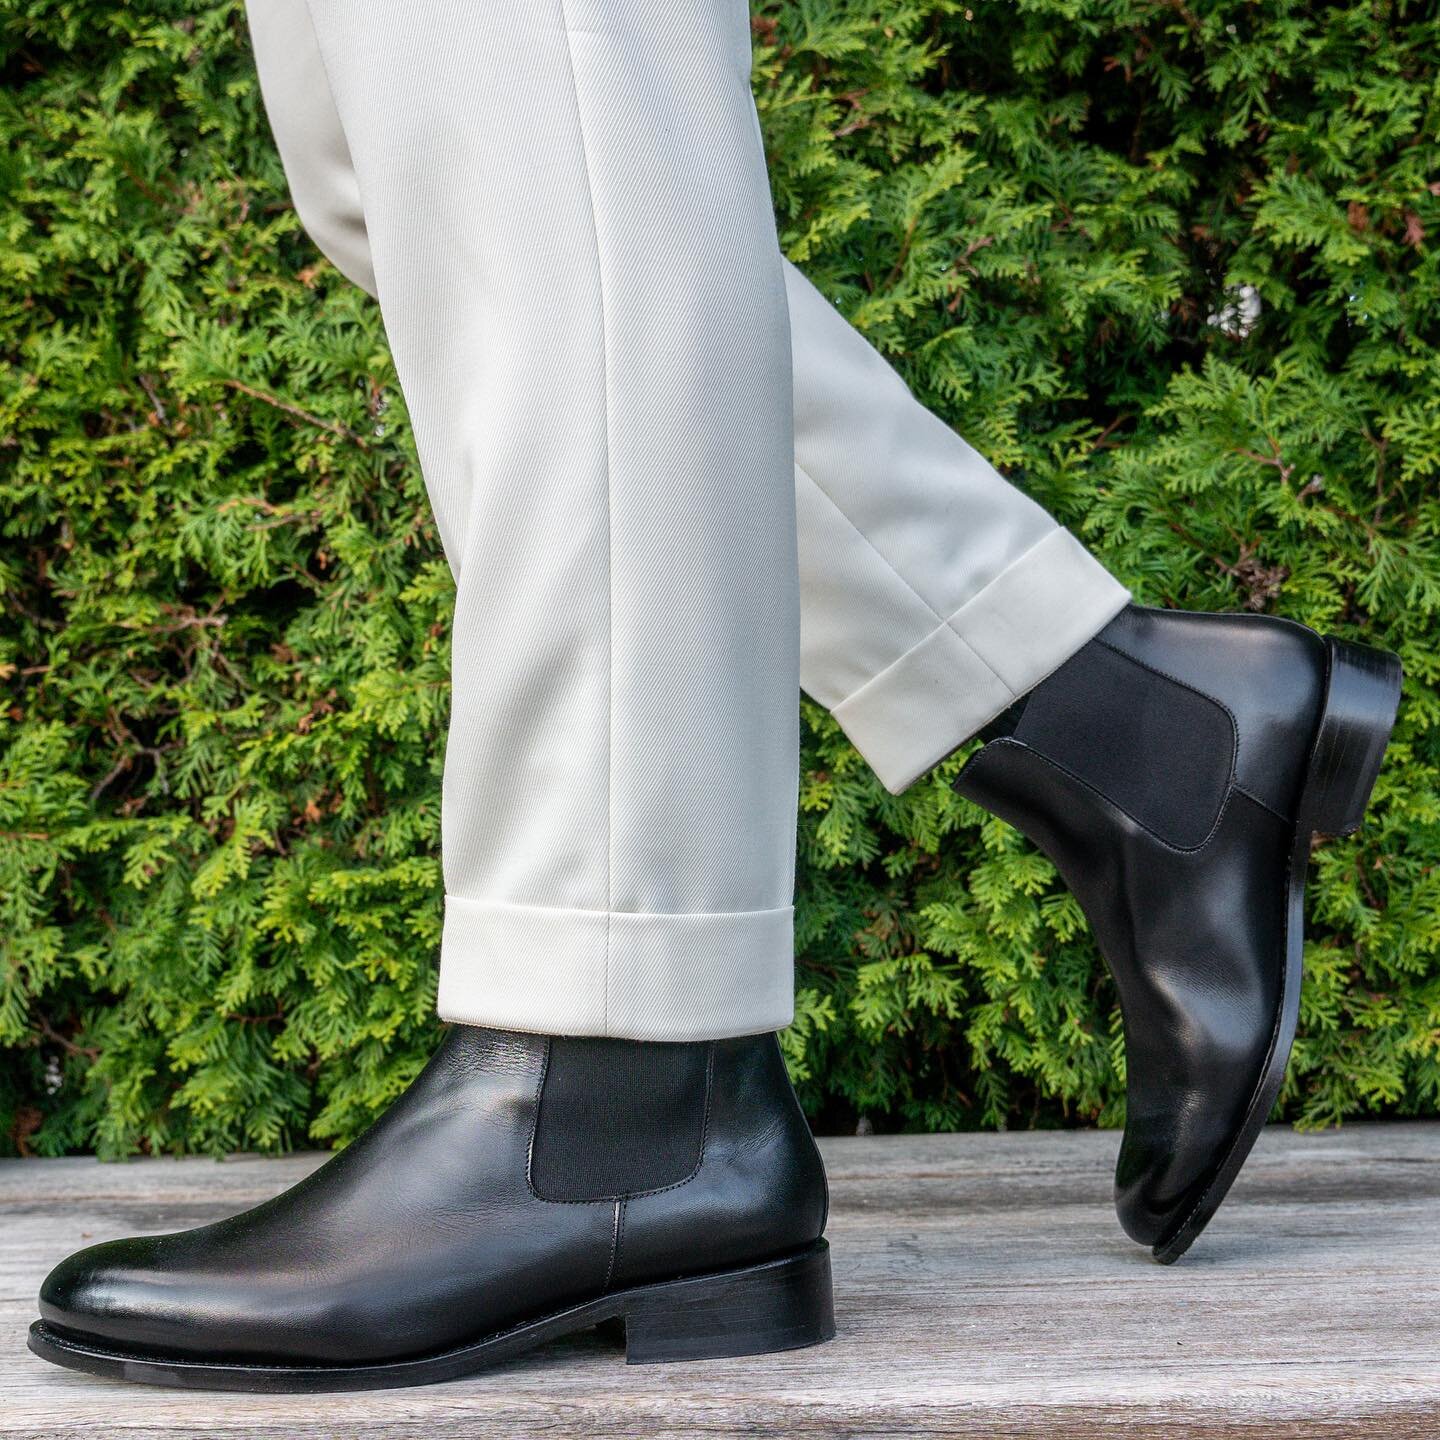 When it comes to our custom shoes, we have the ability to create a wide variety of styles and silhouettes, based on what is best for the shape of your feet. Pictured here is a size 11.5 EE black leather Chelsea boot with a higher heel and rounded toe